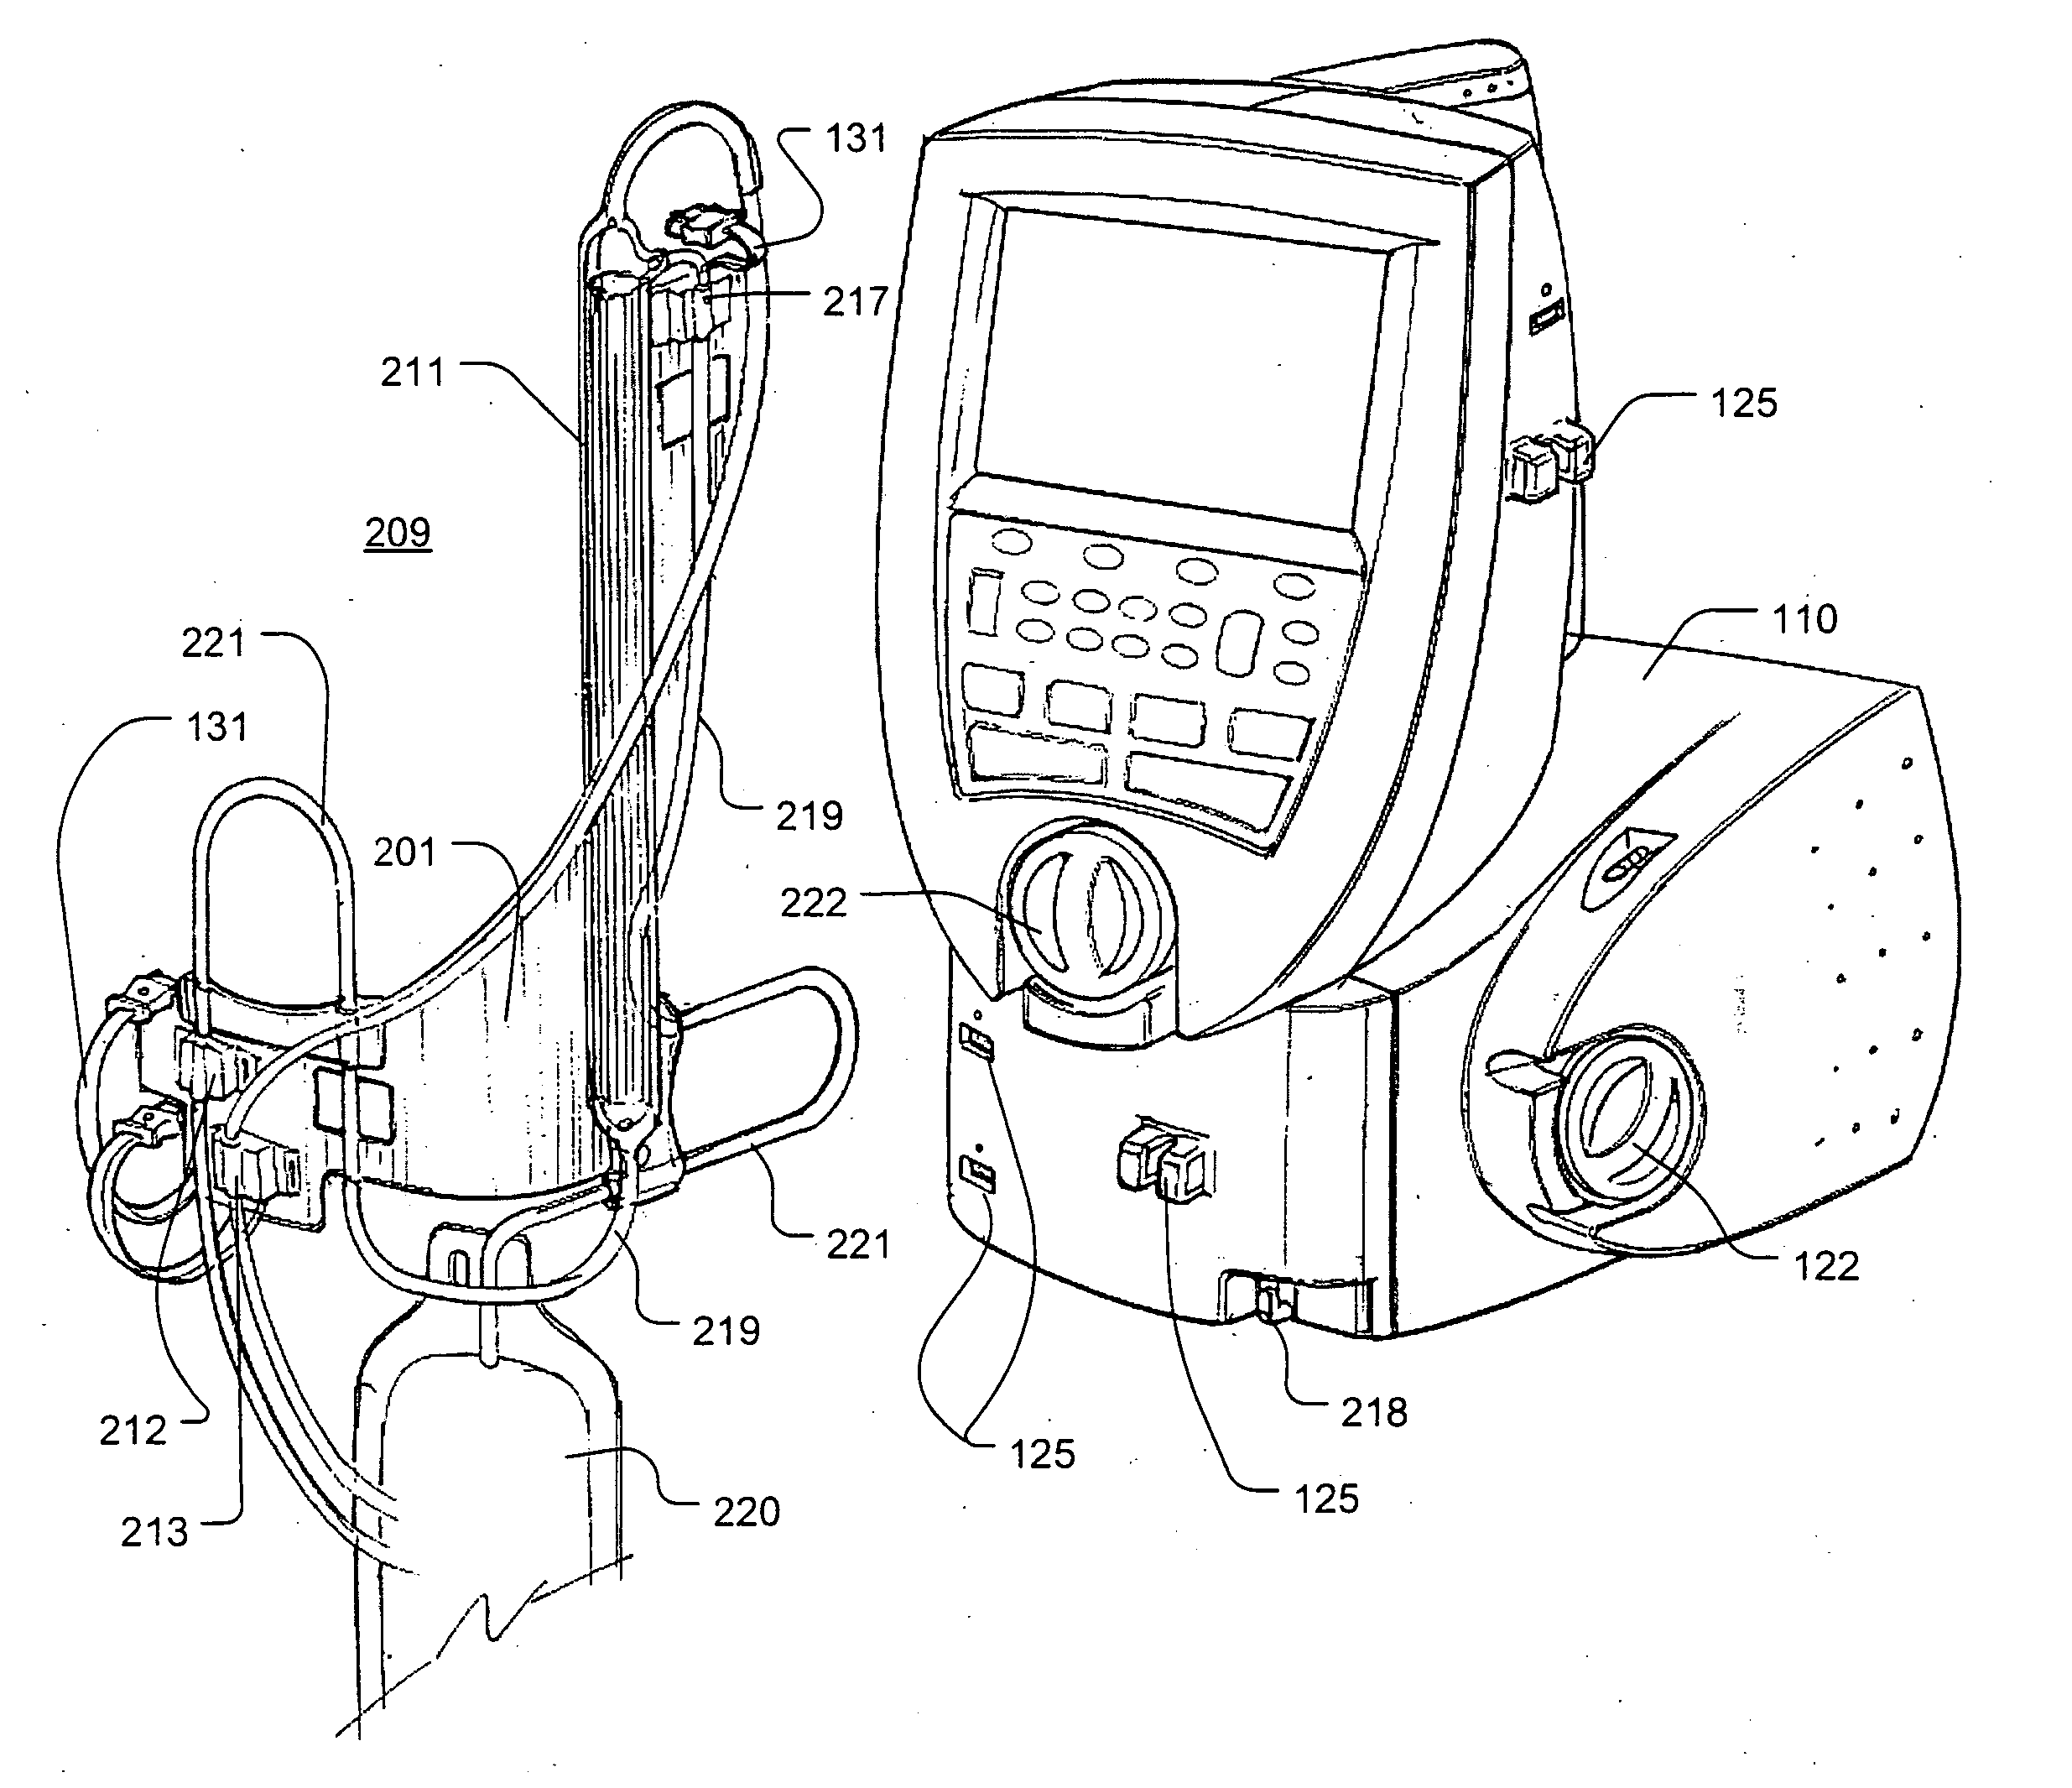 Blood pump having a disposable blood filter with integrated pressure sensors